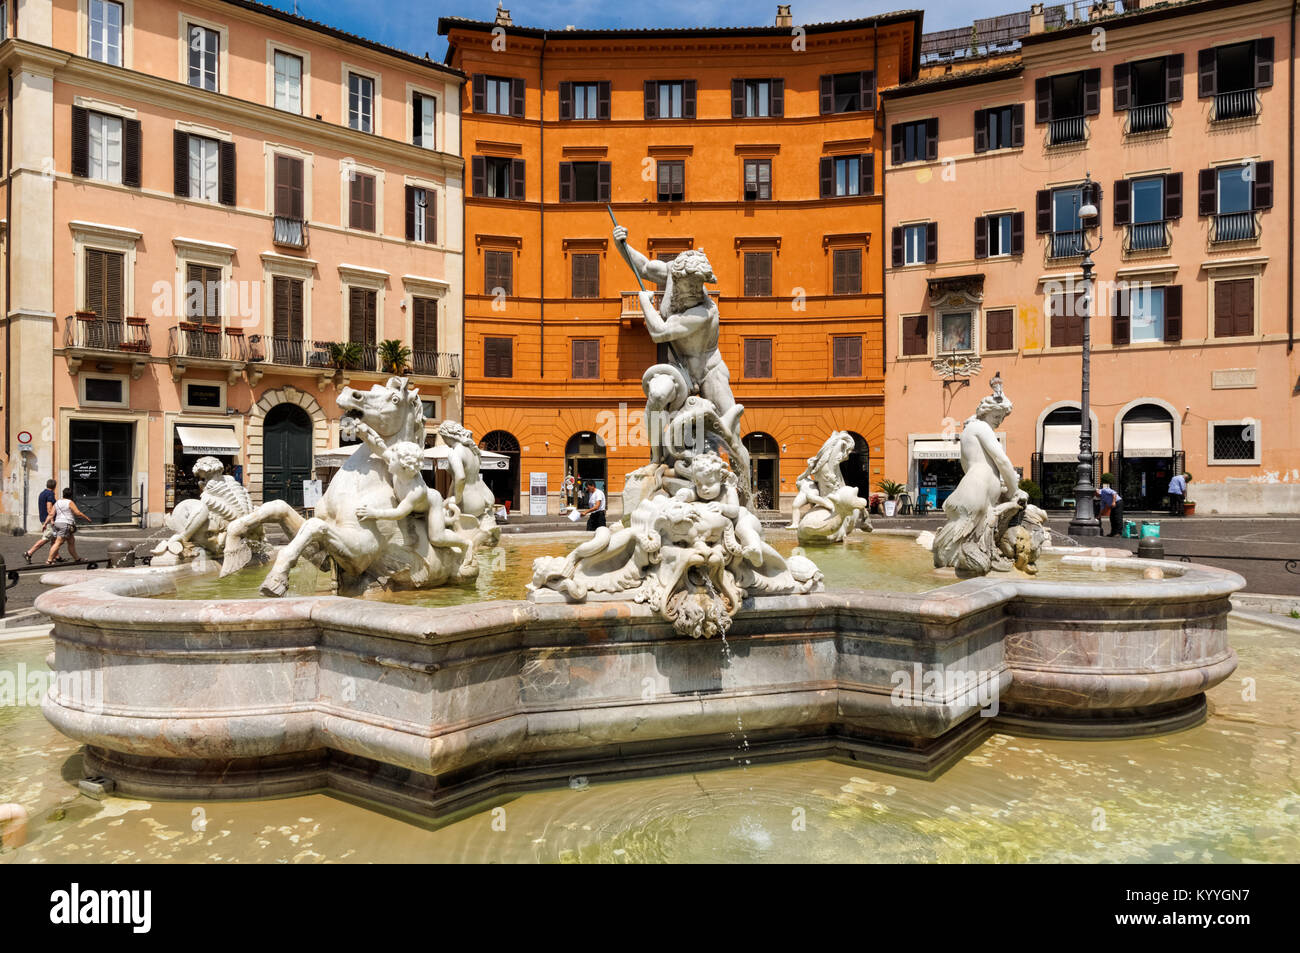 The Fountain of Neptune in the Piazza Navona, Rome, Italy Stock Photo